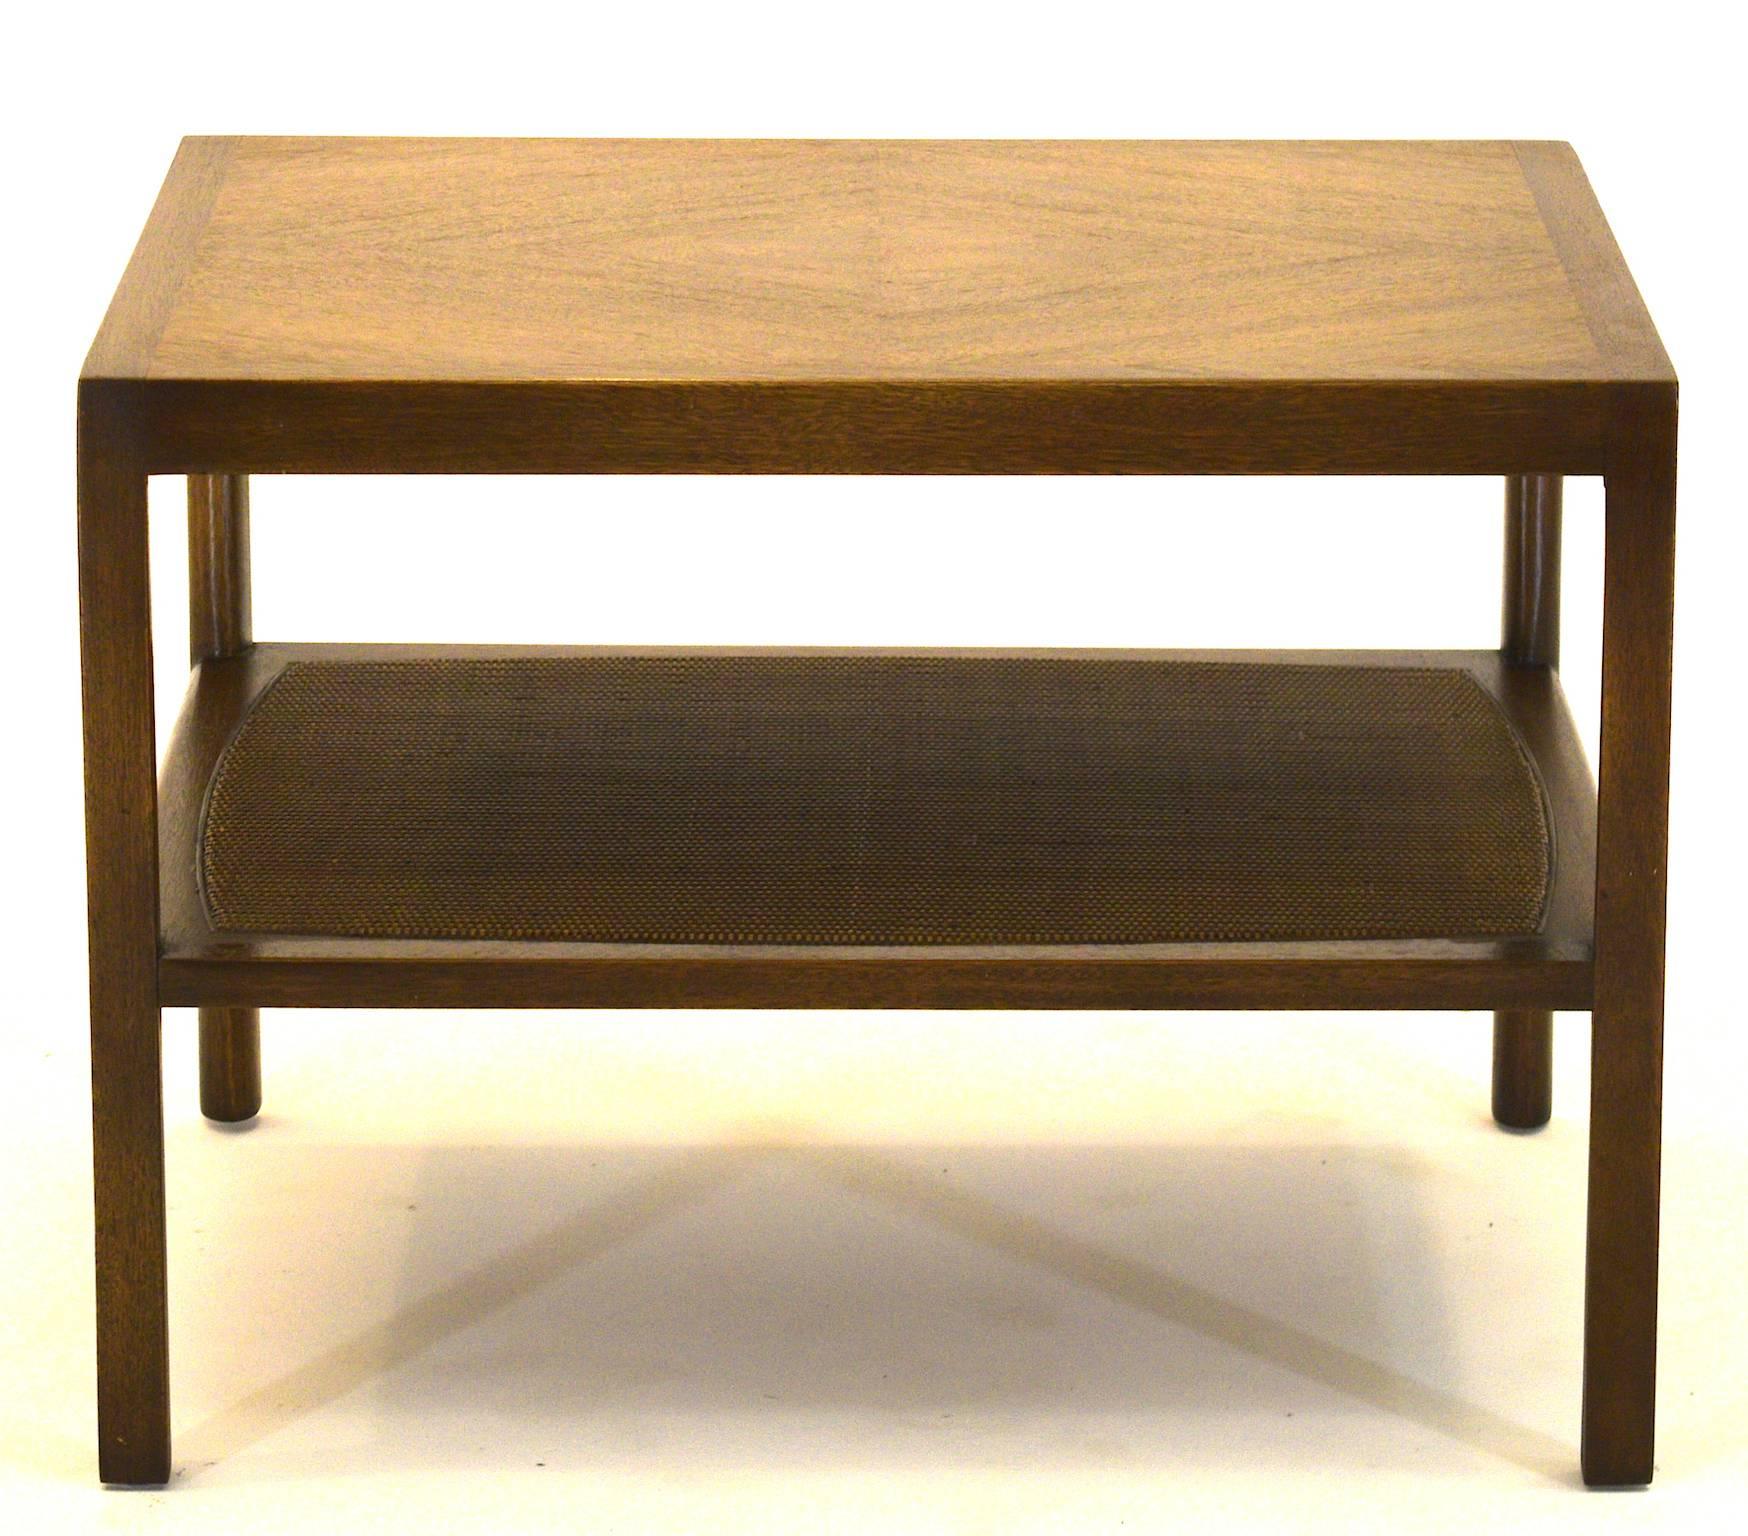 Produced in 1952 this two tier table by Widdicomb is ideal as an end or coffee table.

Measures: 21